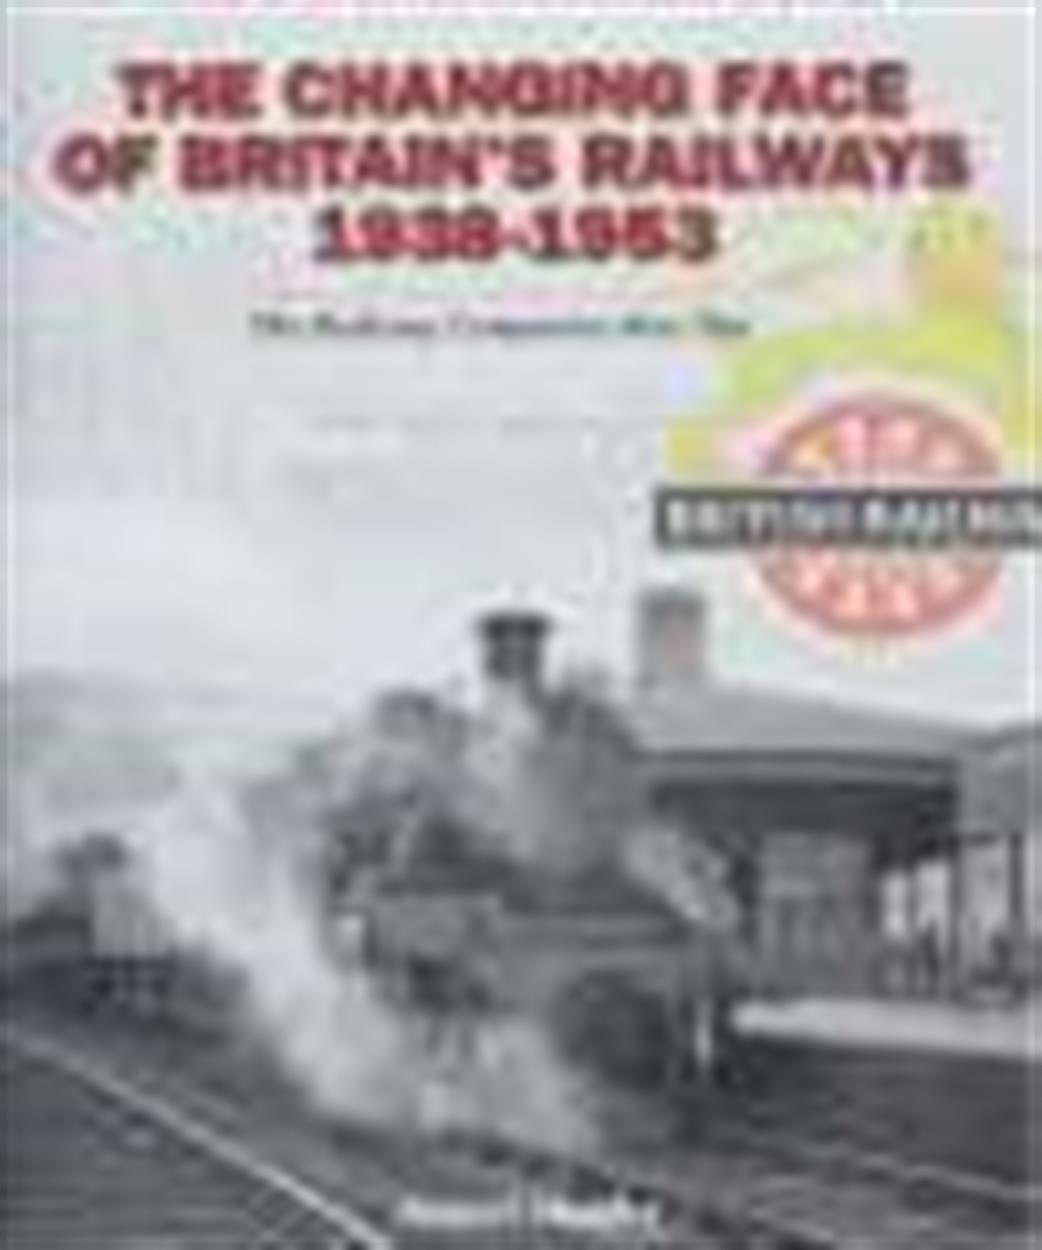 Pen & Sword  9781905414031 The Changing Face of Britain's Railways 1938-1953 Robert Hendry